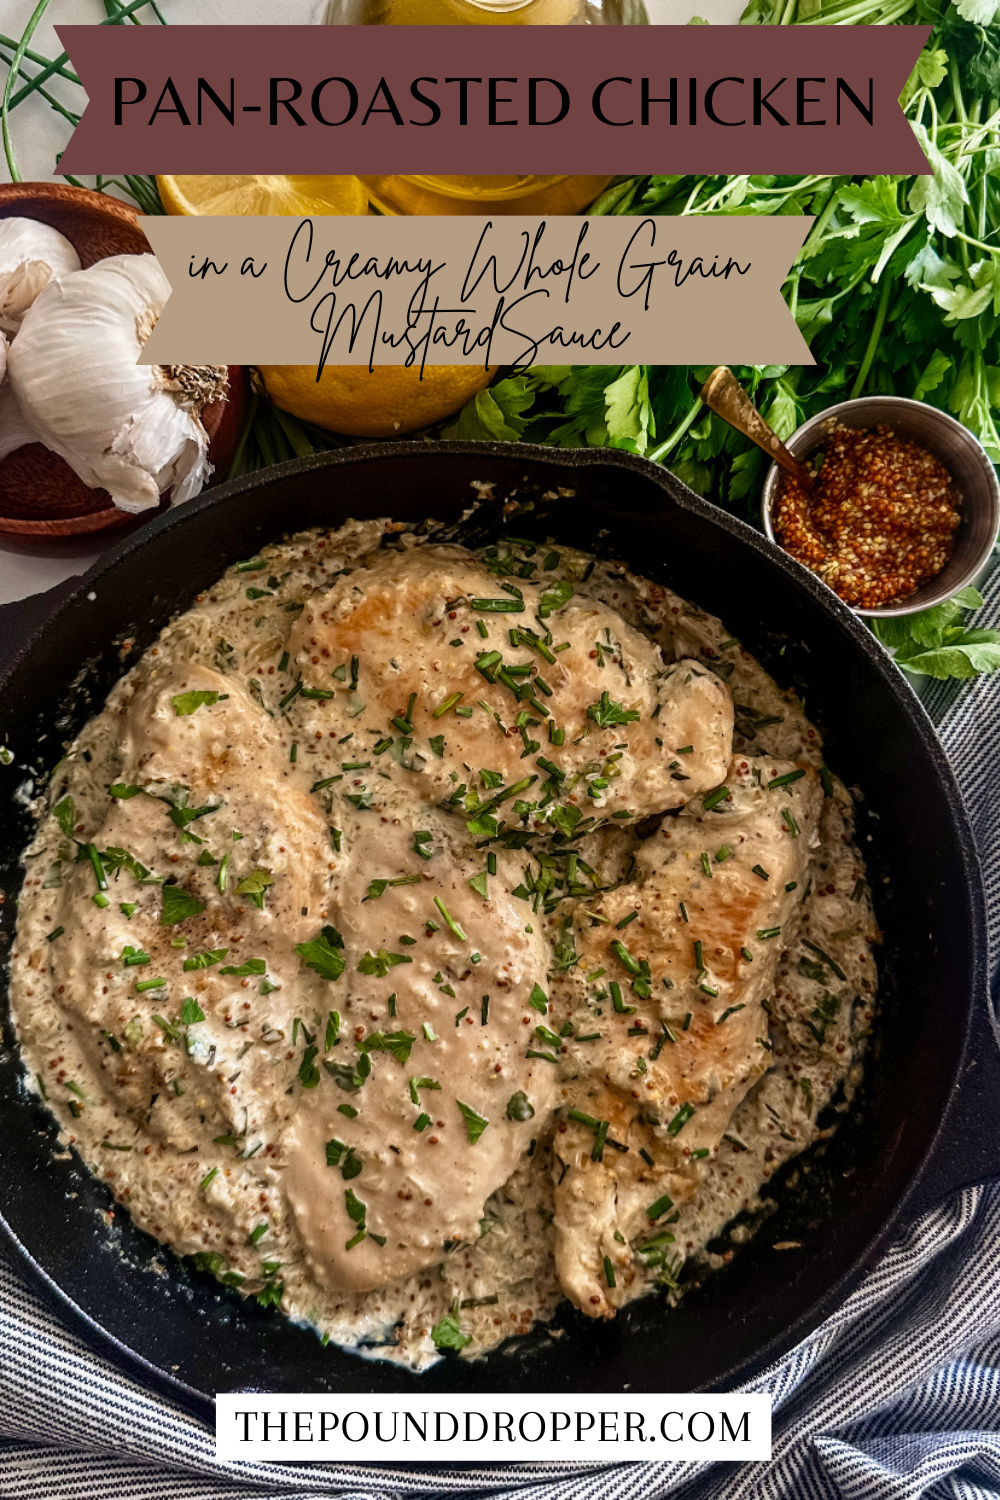 Pan-Roasted Chicken in a Creamy Whole Grain Mustard Sauce via @pounddropper